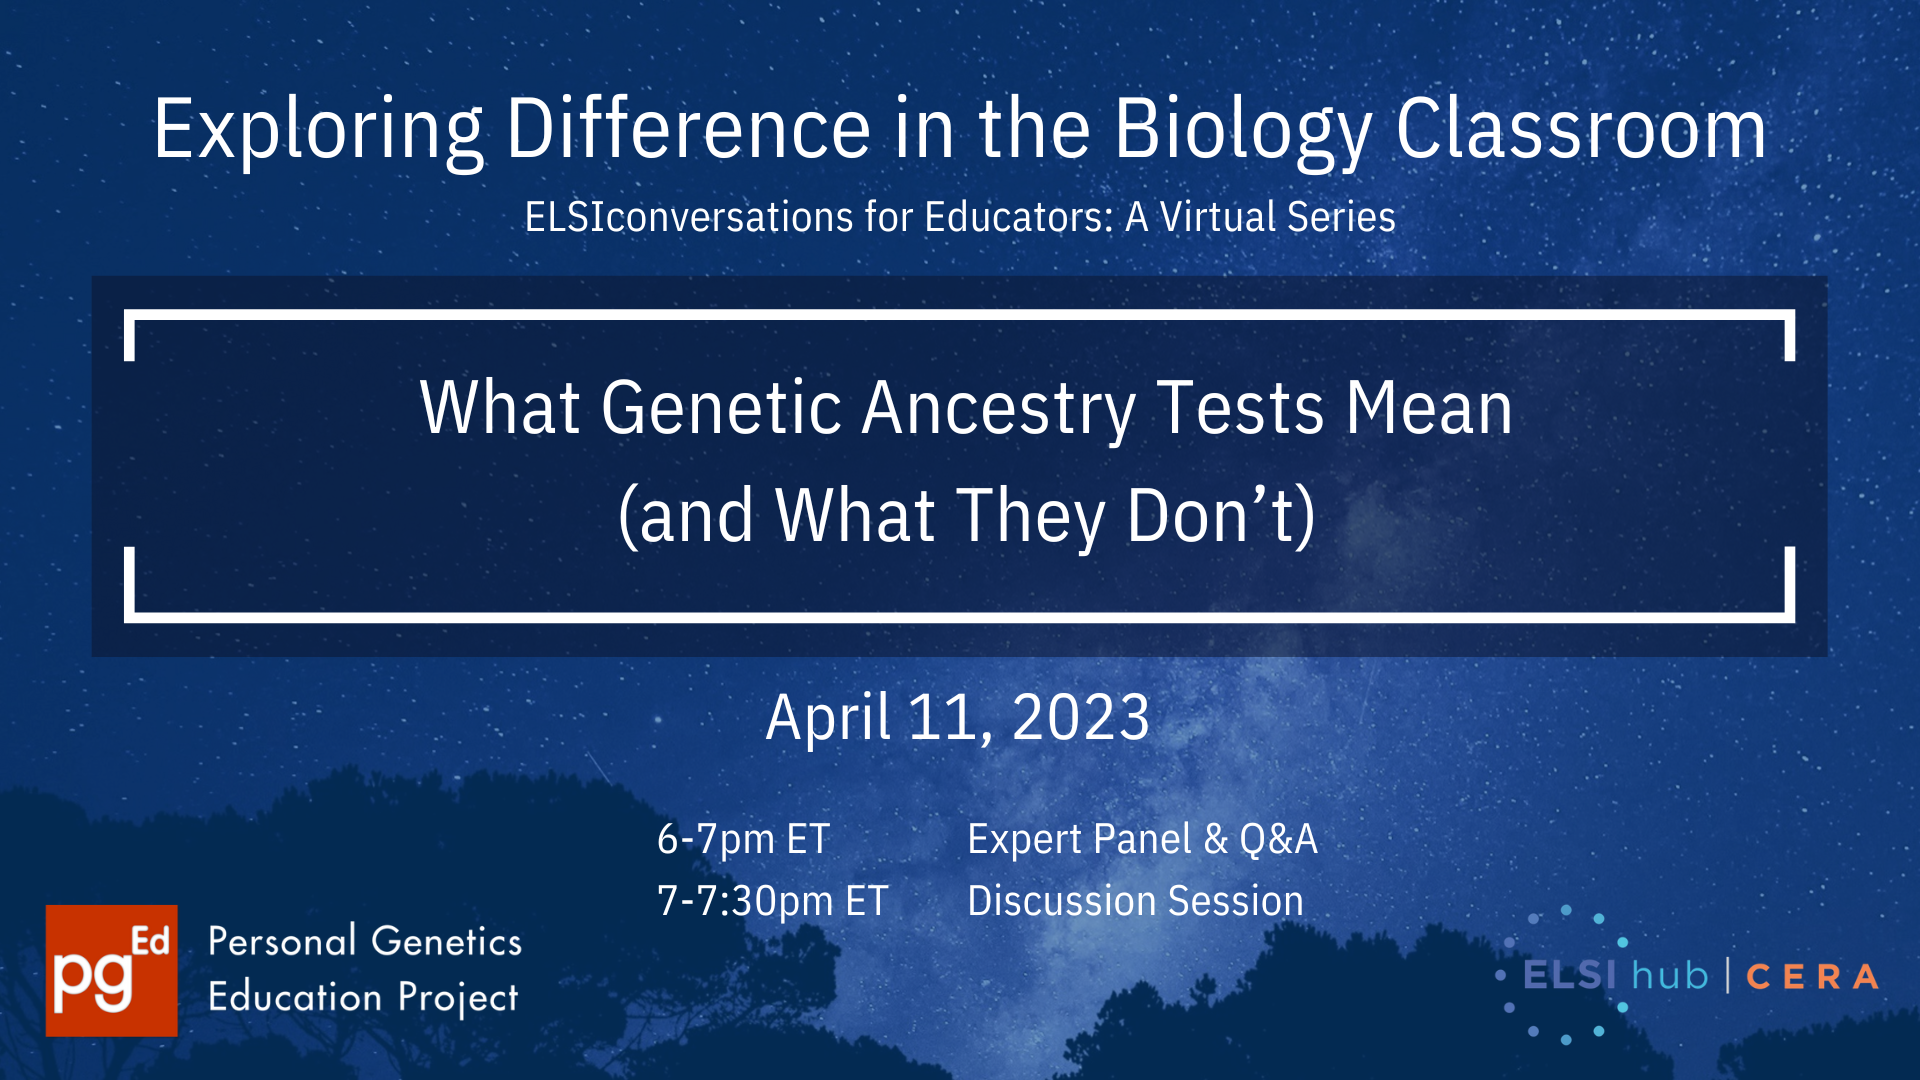 The graphic has a blue tinted background showing a view of the night sky above a tree line. 
In white, the text on the graphic reads the following: "Exploring Difference in the Biology Classroom. ELSIconversations for Educators: A Virtual Series. What Genetic Ancestry Tests Mean (and What They Don’t). April 11, 2023. 6-7pm ET Expert Panel & Q&A. 7-7:30pm ET Discussion Session"
In the left bottom corner is our pgEd logo and in the right bottom corner is the logo of ELSIhub, our collaborator on this webinar series.